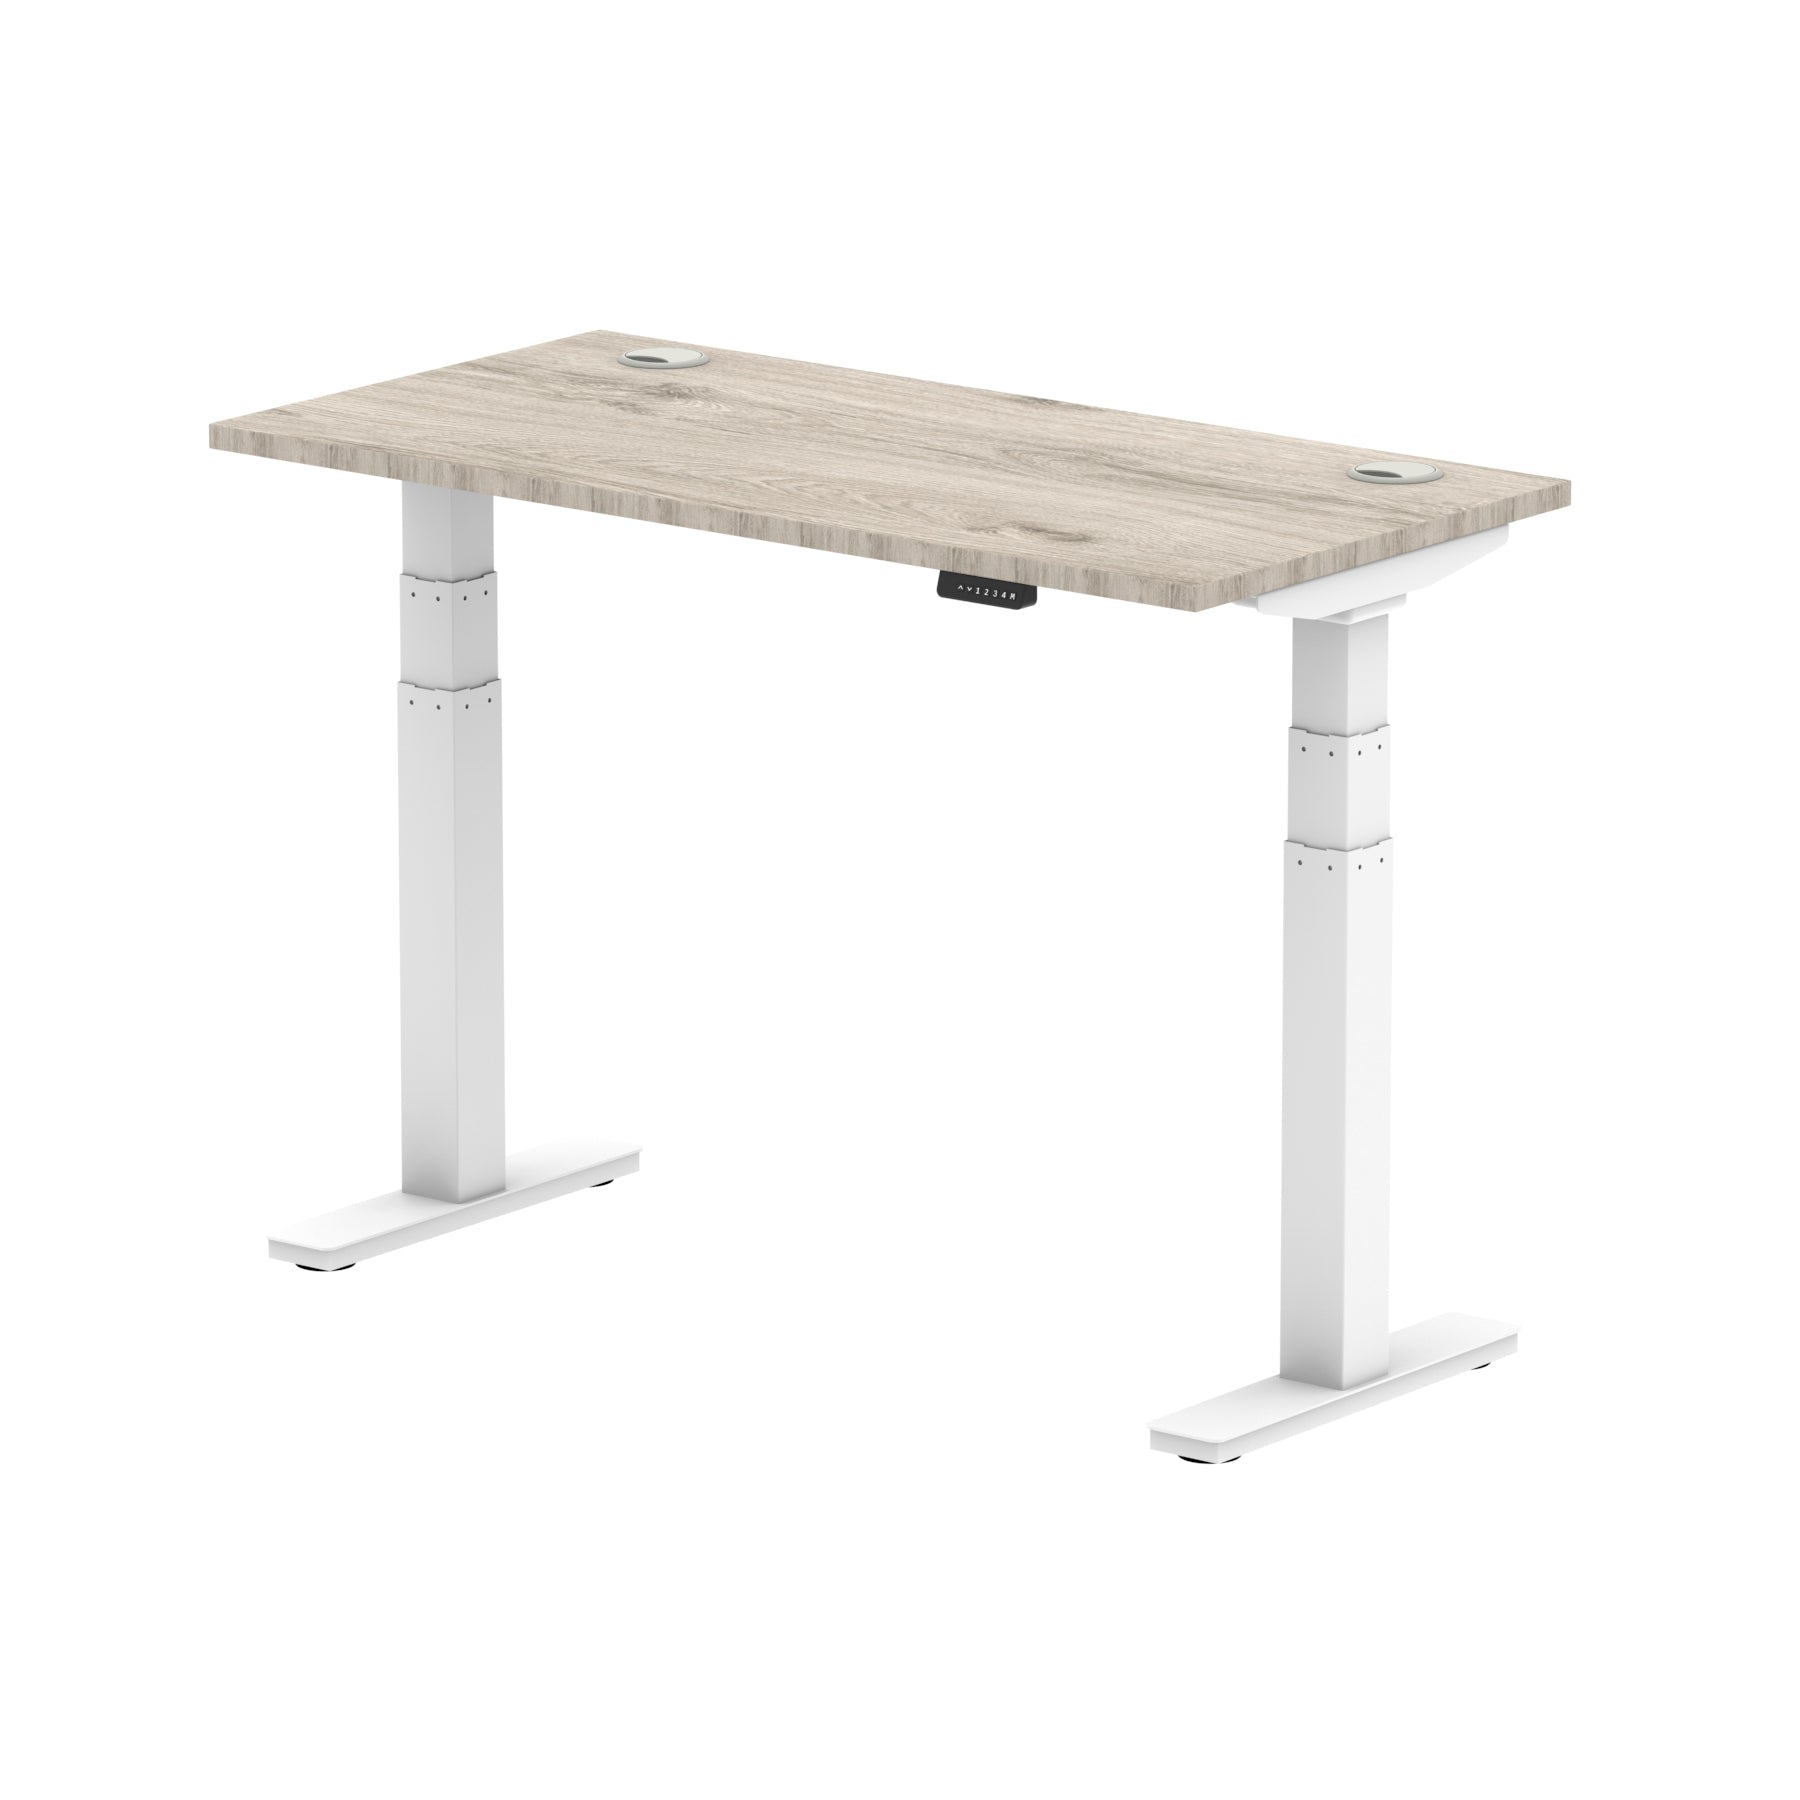 Air Height Adjustable Slimline Desk 1200-1800mm, Cable Ports, MFC Rectangular Top, Black/Silver/White Frame, 5-Year Guarantee